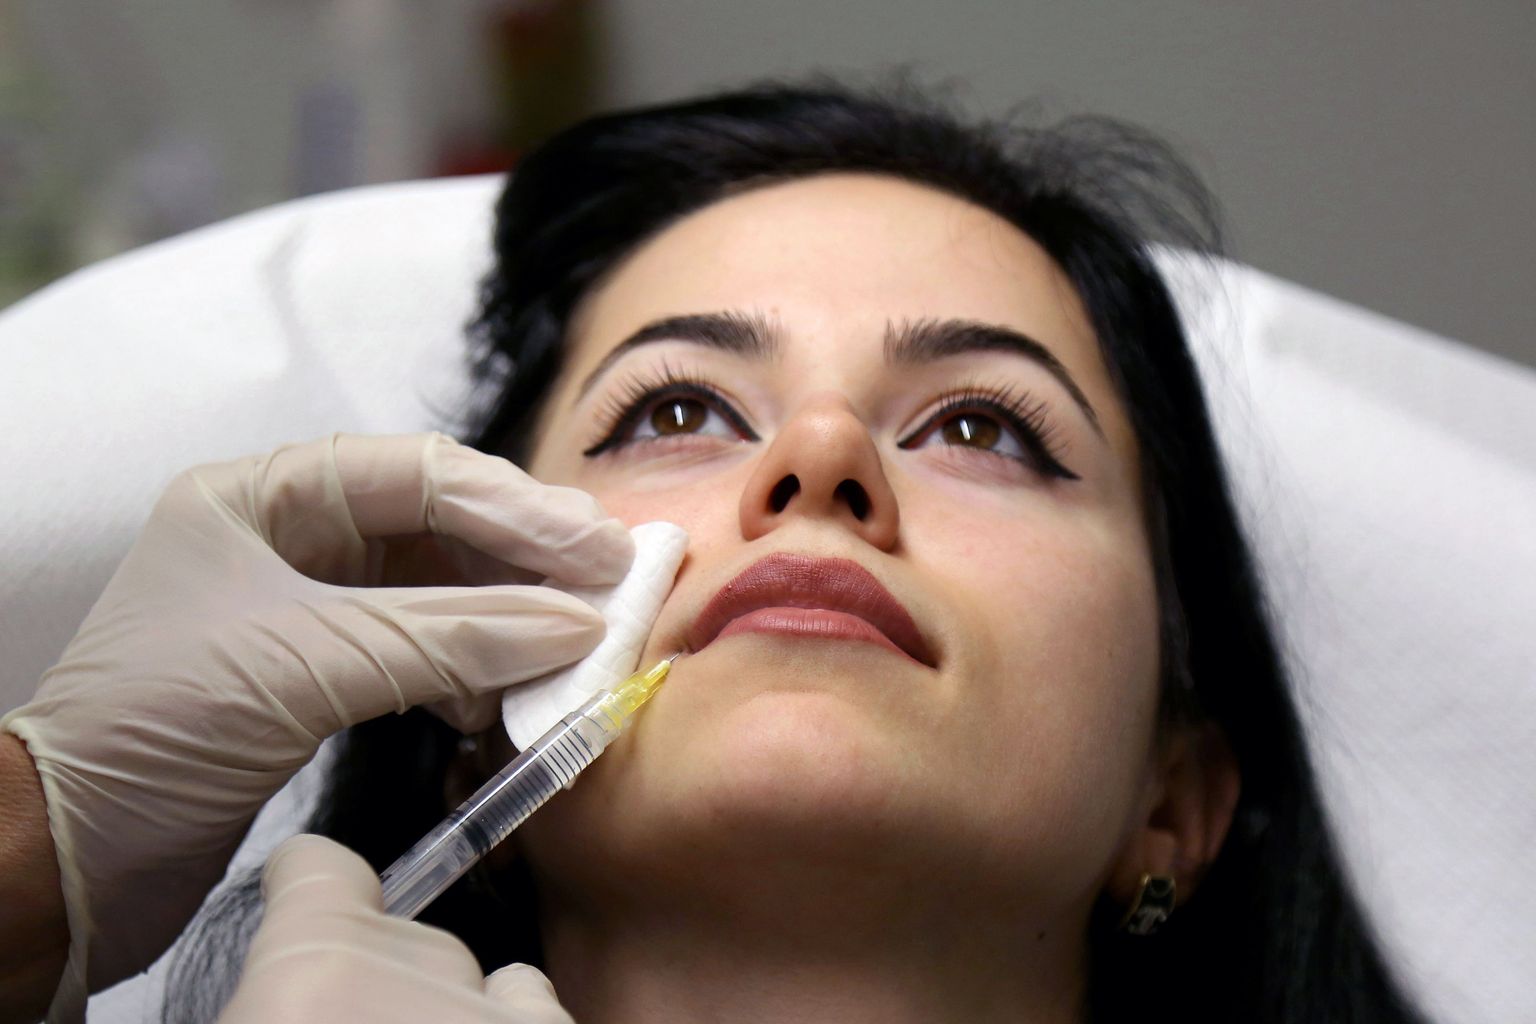 Dermatologist Monika Fida (not pictured) gives to a woman a lip augmentation injection of hyaluronic acid at her clinic on January 10, 2017. 
Emira Sela covers her face with her hand to hide a disfiguring abscess, the traumatic result of unregulated cosmetic treatments now rampant across Albania. The 31-year-old began to worry when wrinkles appeared on her face. Sela's hairdresser told her that a simple injection, costing around 60 euros ($65), would banish the signs of ageing.
 / AFP PHOTO / GENT SHKULLAKU